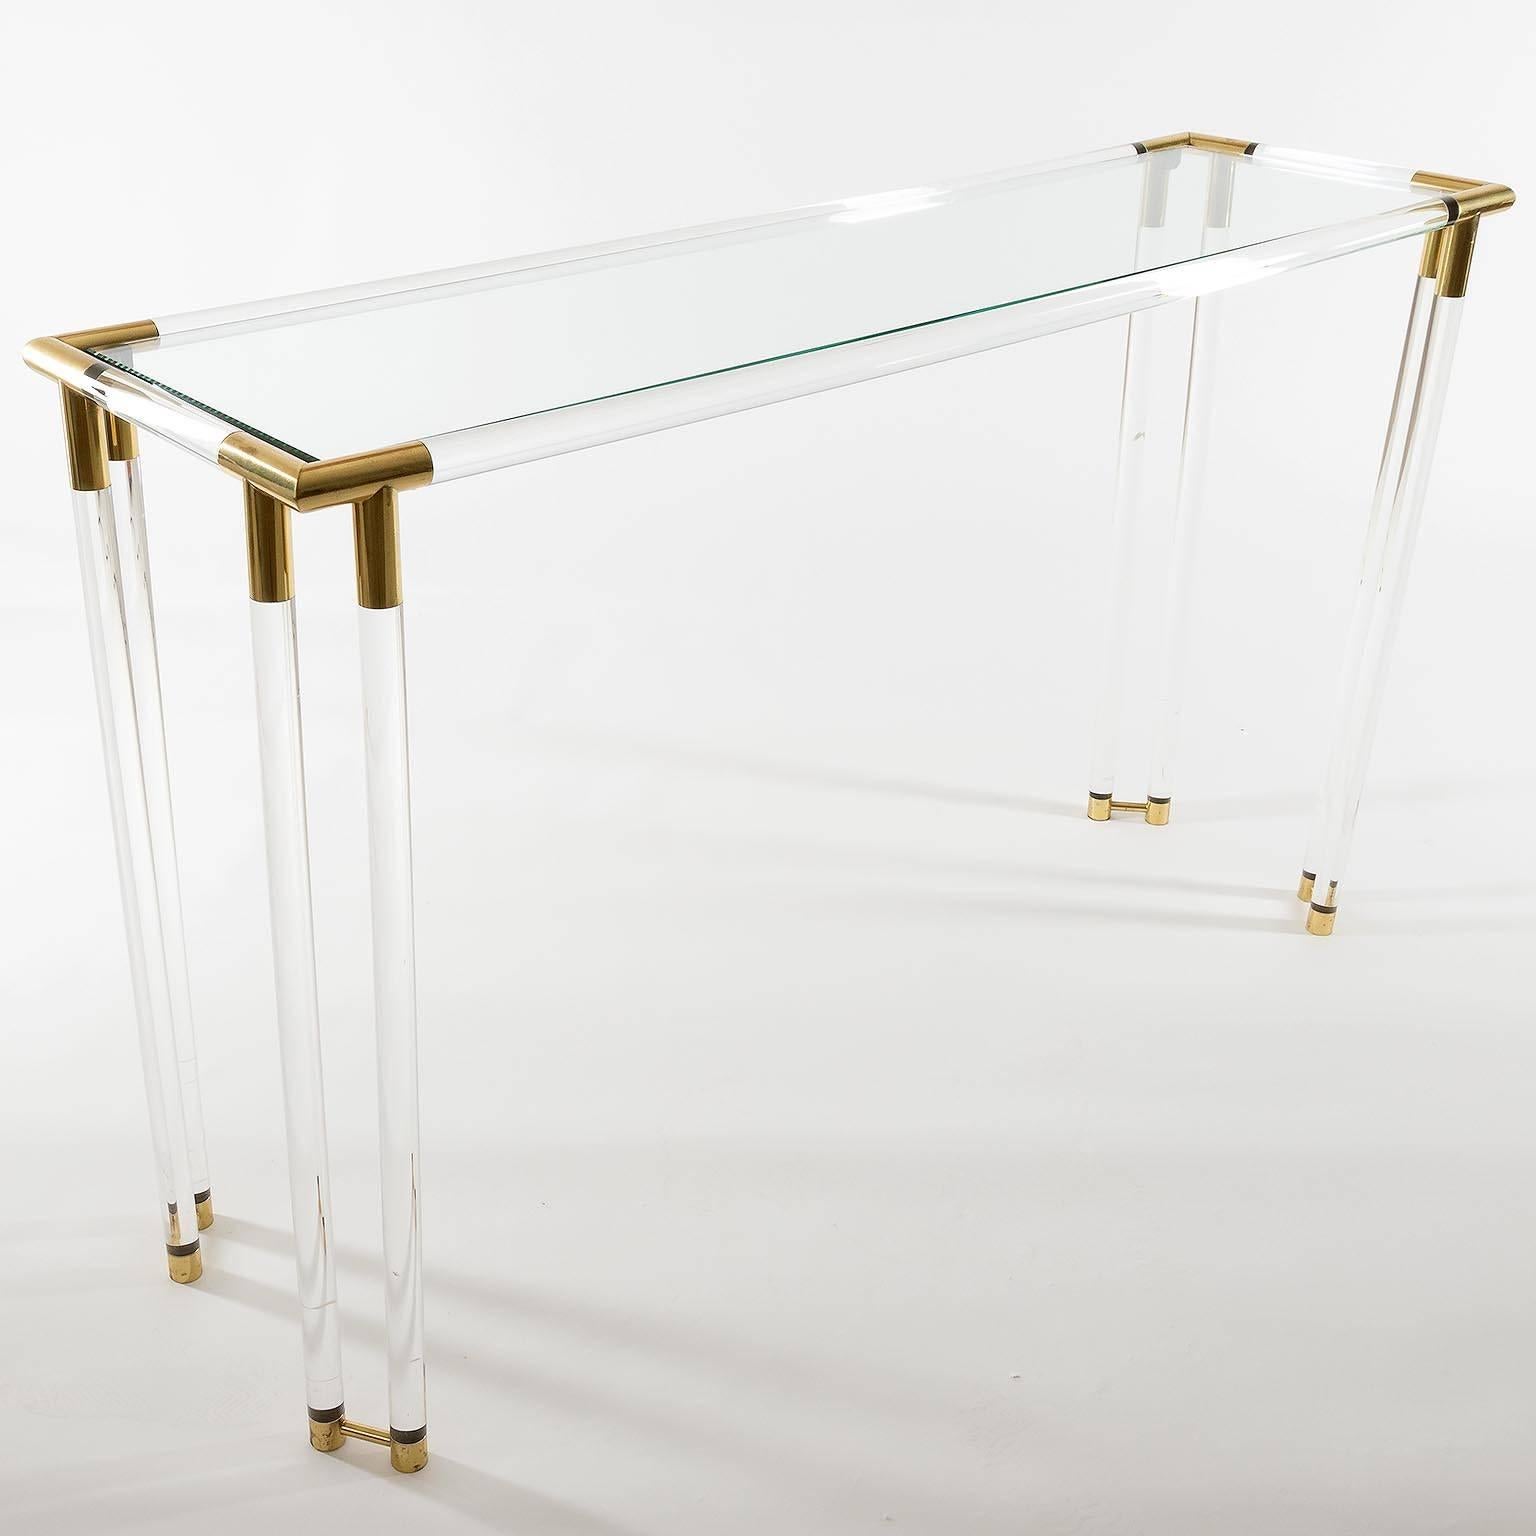 A large and stylish French, brass, glass and Lucite rectangular console table in the manner of Pierre Vandel, Paris, manufactured in Mid-Century in 1970s. 
Nice patina on brass.

To reduce shipping costs the table will be disassembled. The two long